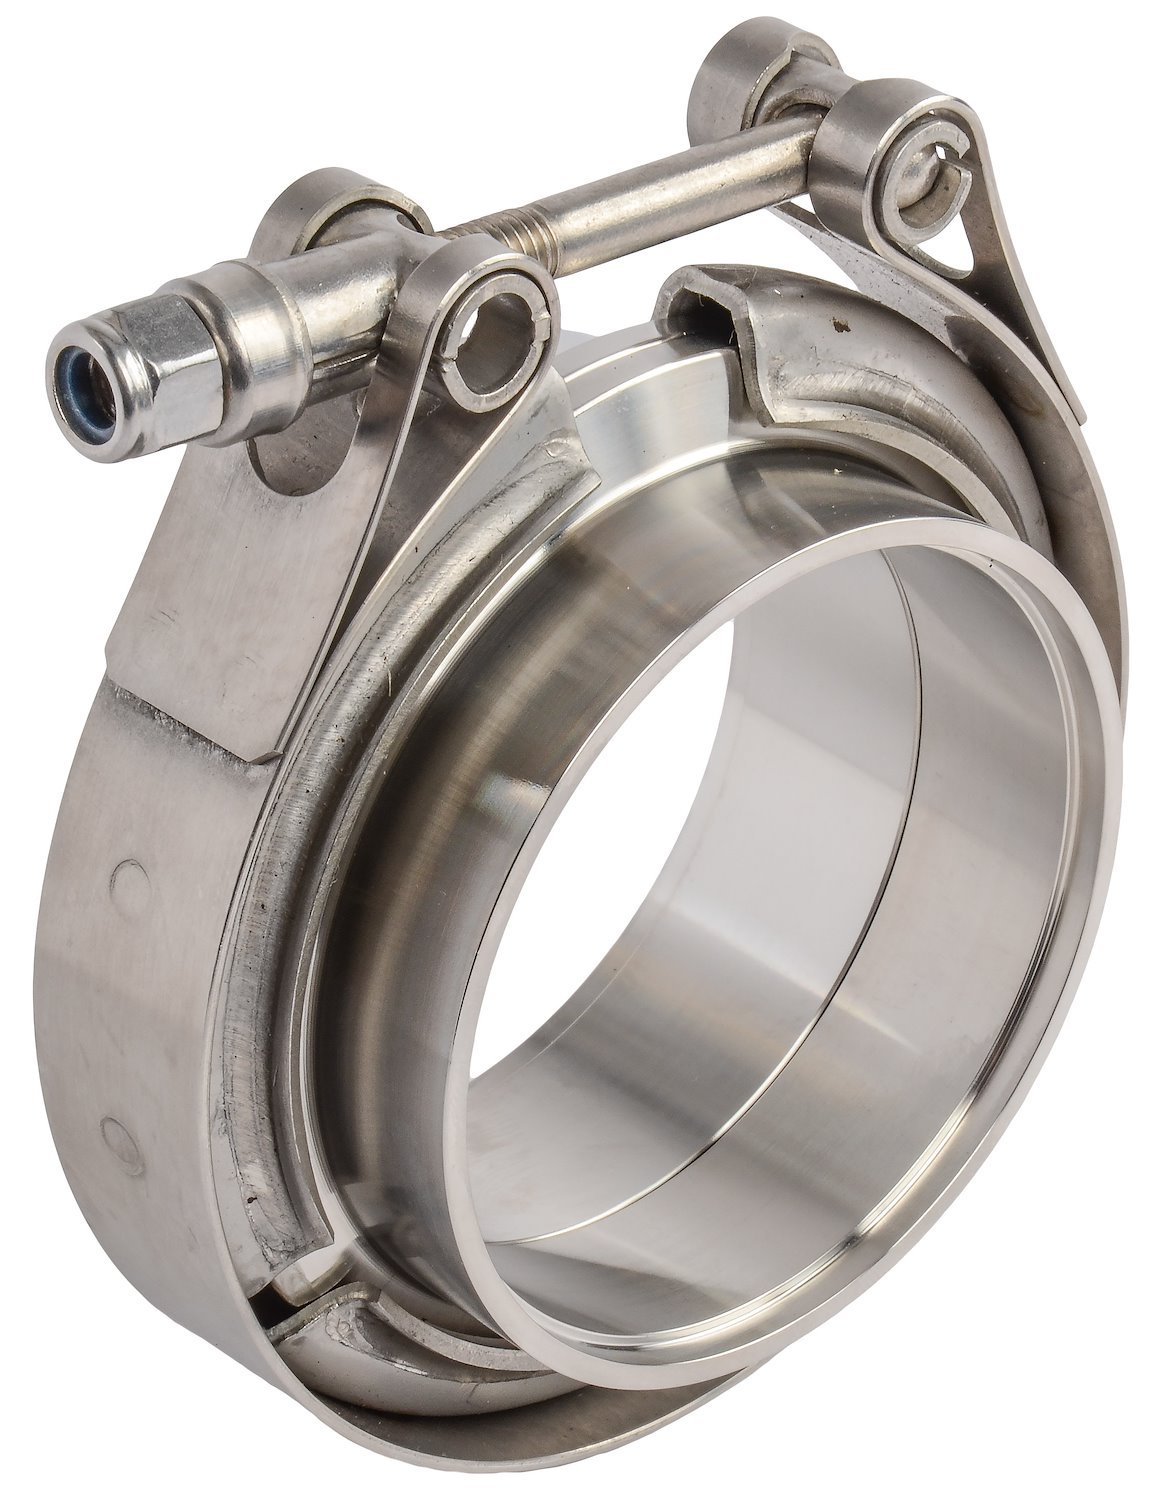 Stainless Steel Standard V-Band Clamp & Flanges 2.500 in.